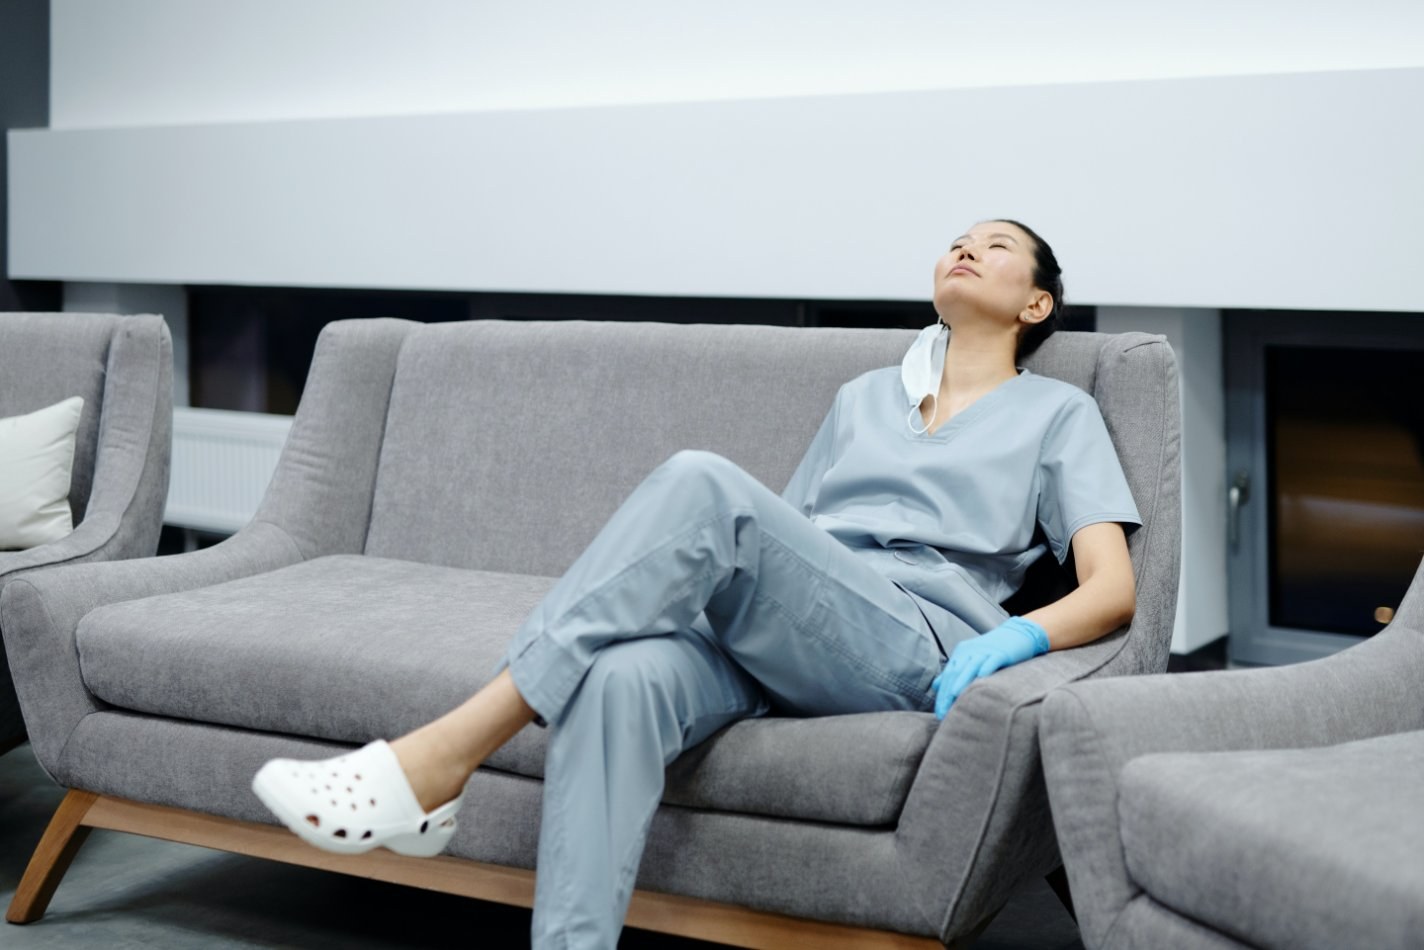 Nurse sitting on a couch